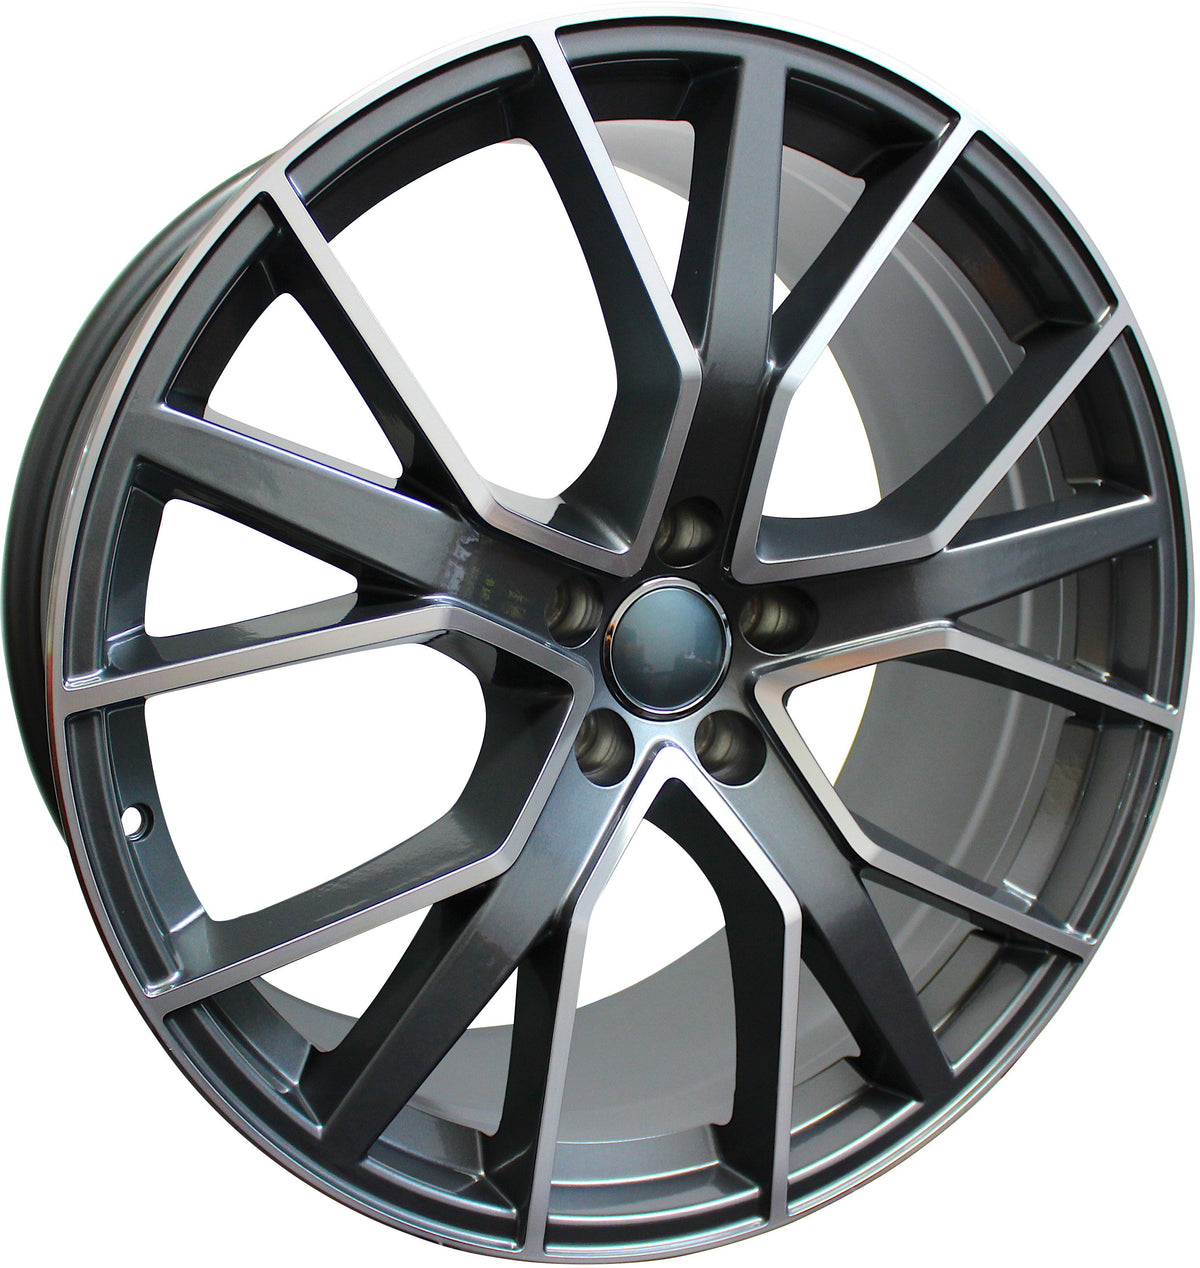 21 INCH WHEELS AUDI S LINE  Q5 Q6 Q7 S5 S6 A5 A6 A7 GUNMETAL MACHINED RIMS S8 STYLE